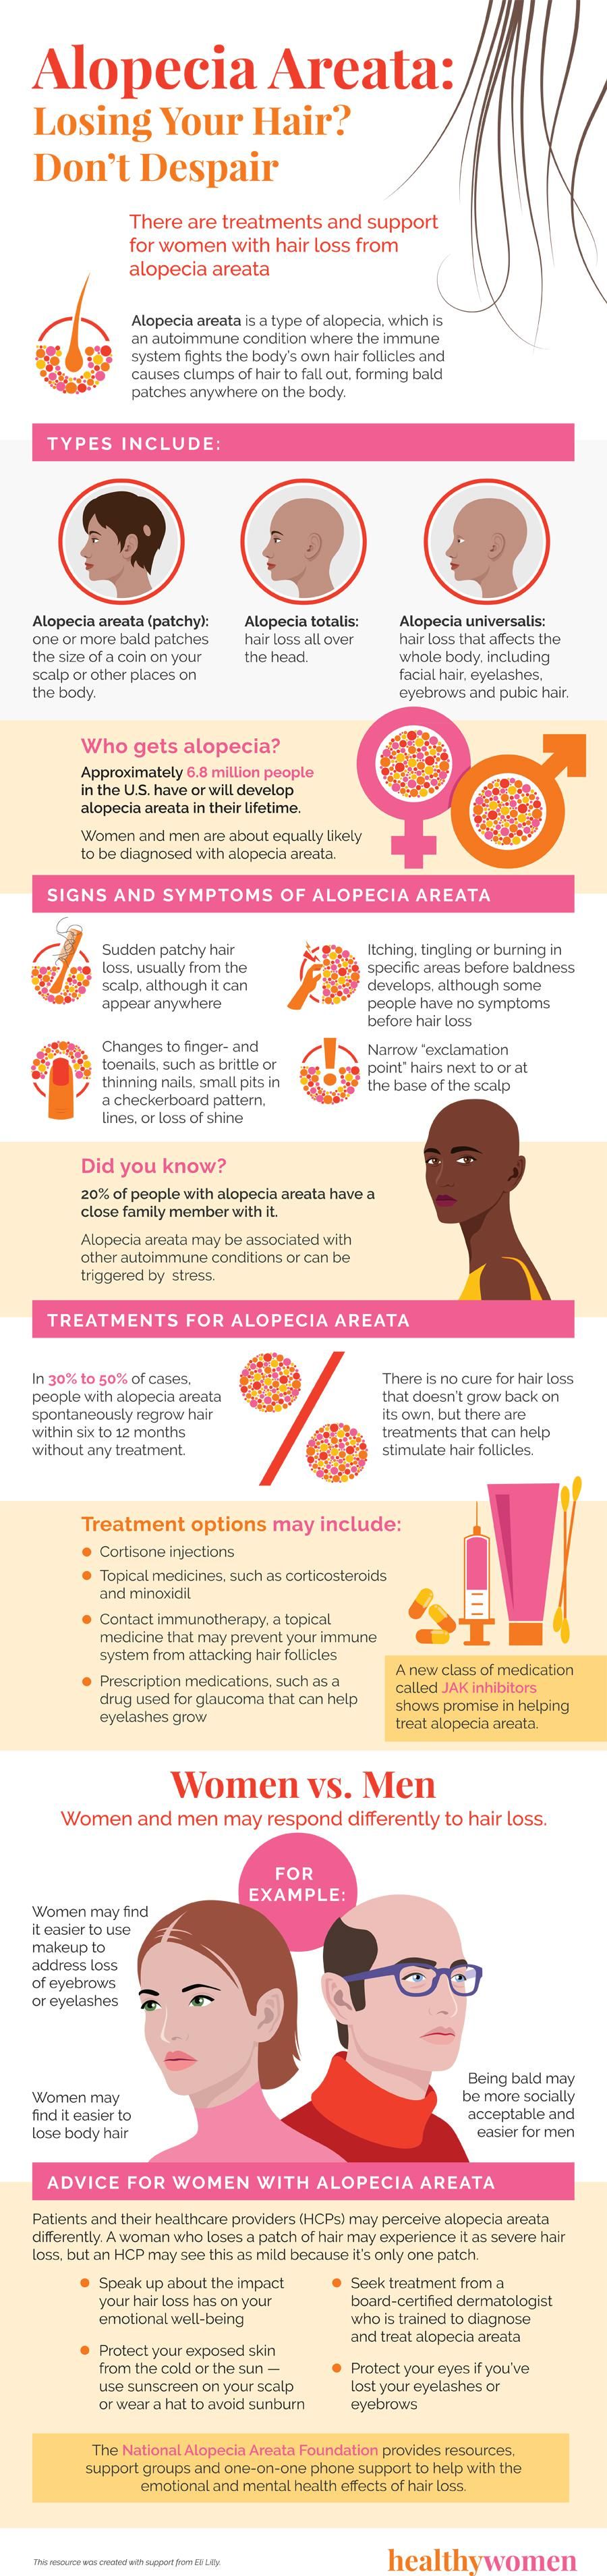 Infographic Alopecia Areata: Losing Your Hair? Donu2019t Despair. Click the image to open the PDF